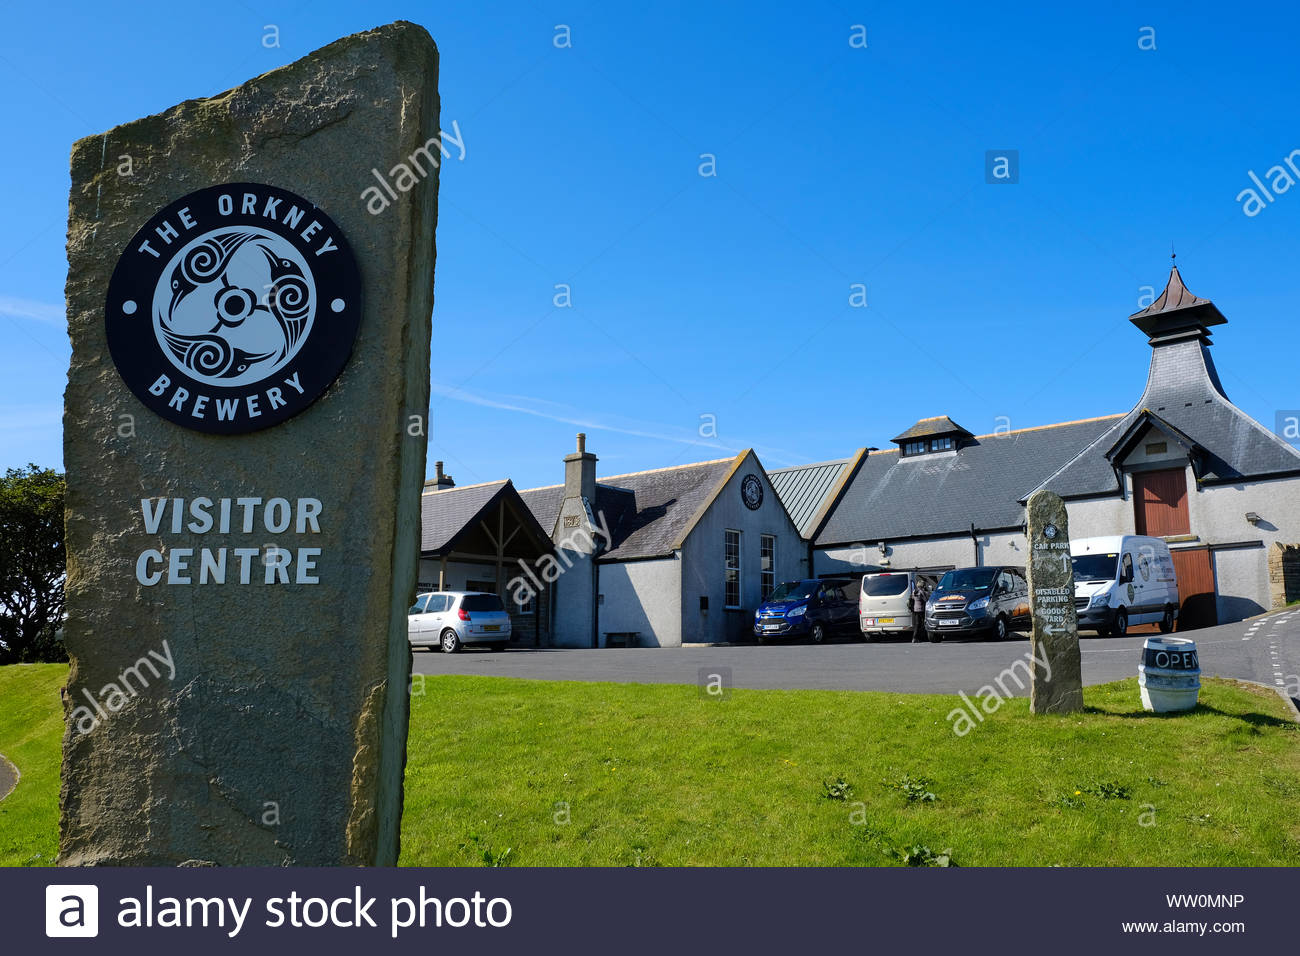 The Orkney Brewery visitor centre, Orkney Scotland Stock Photo